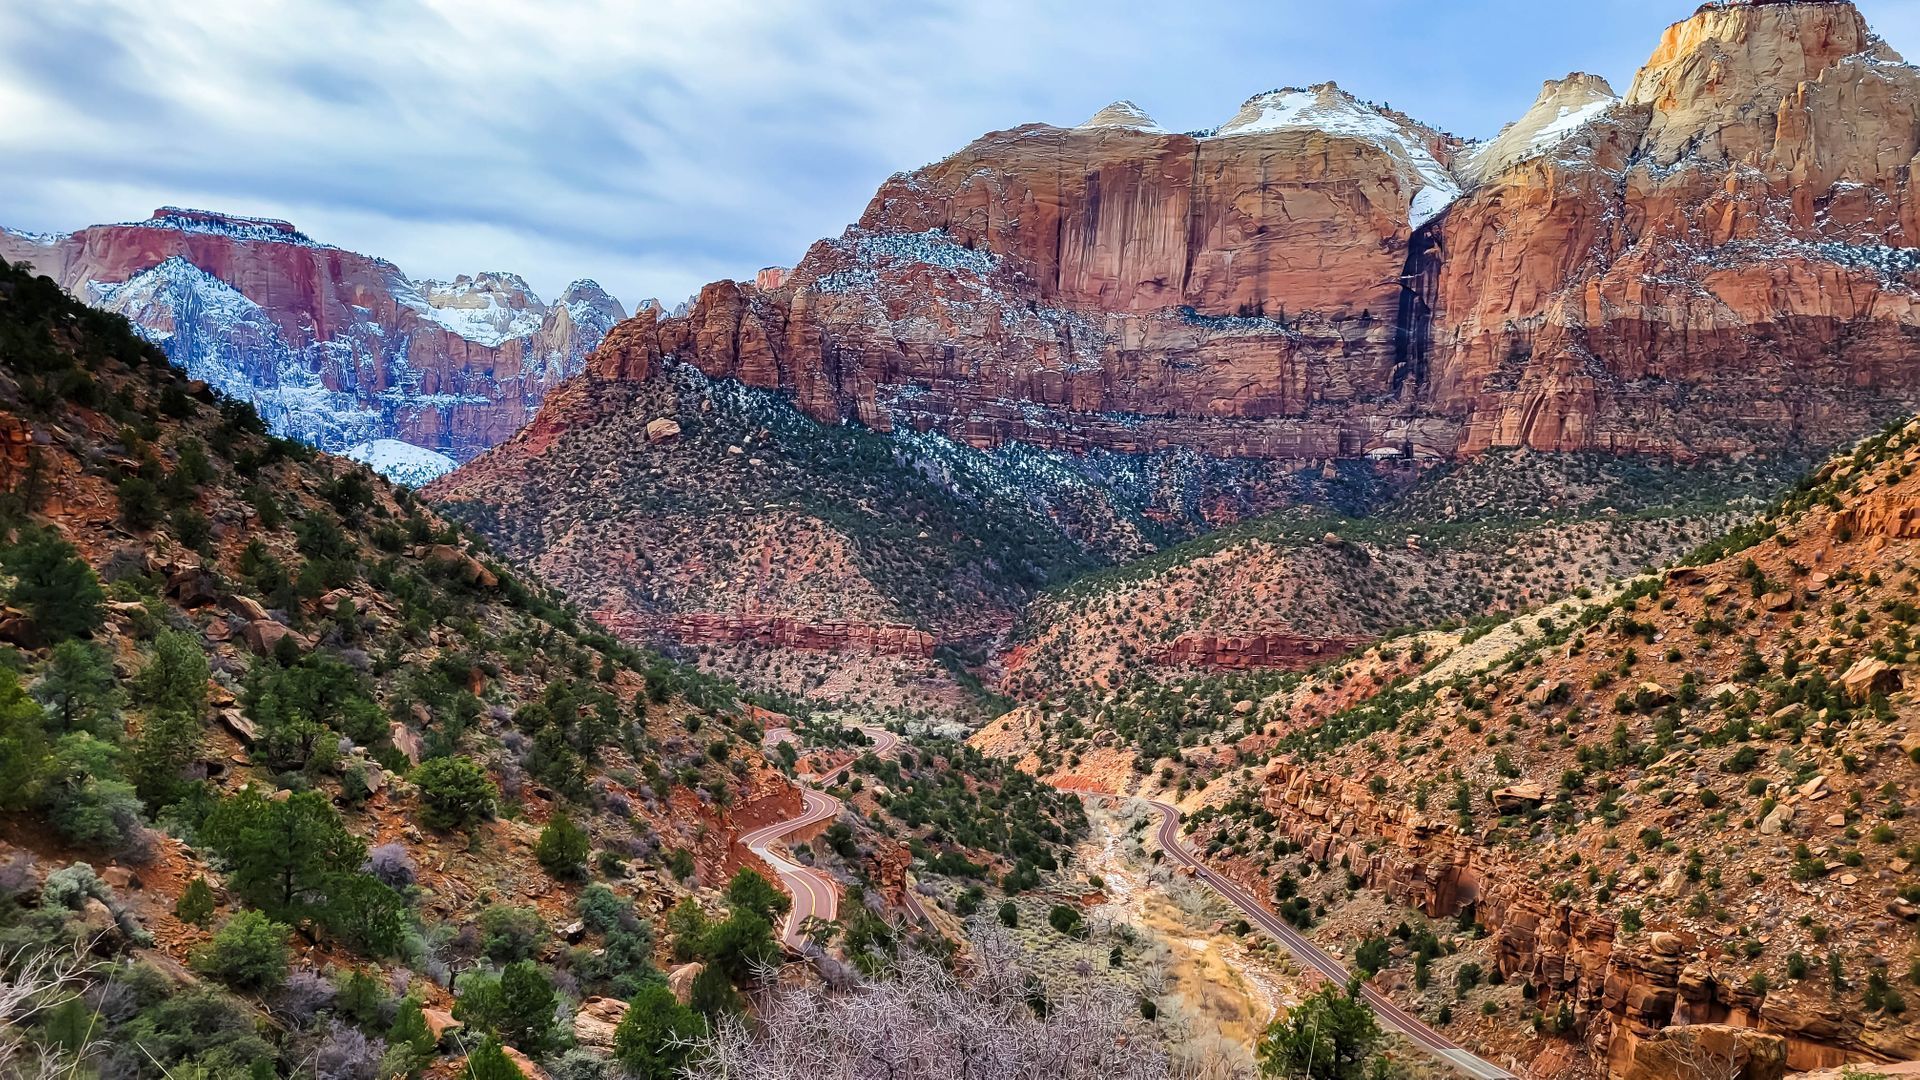 Entering Zion National Park from the east, southern Utah